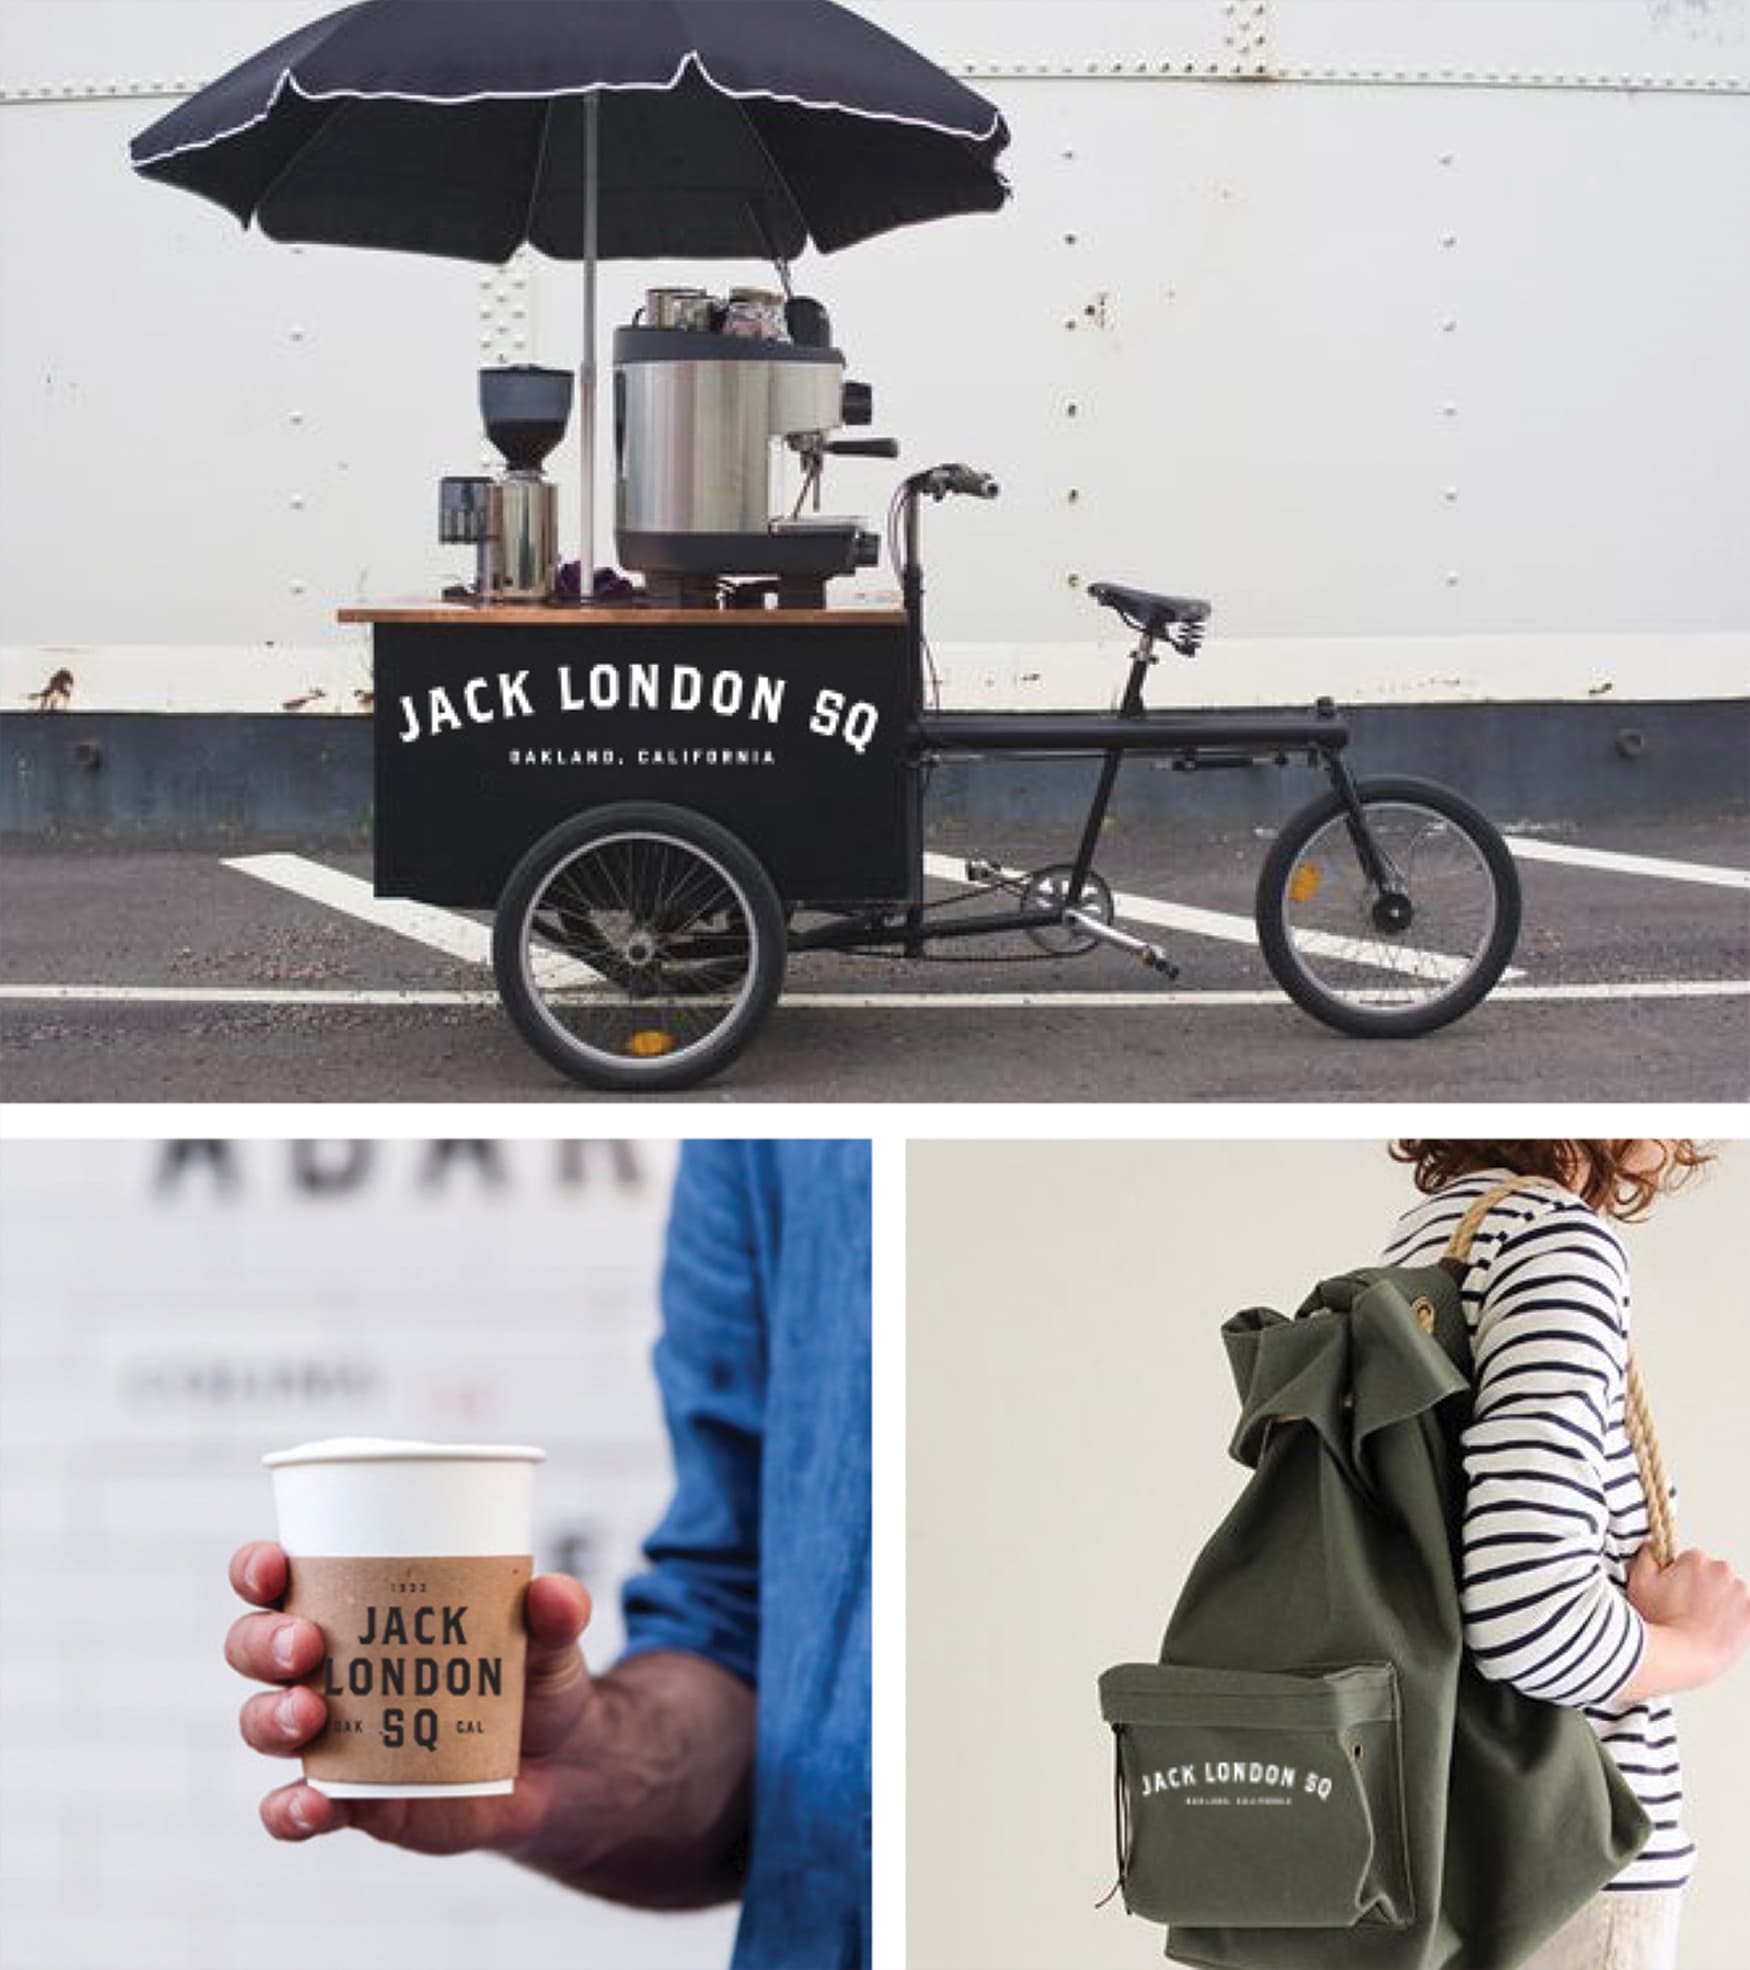 Jack London Square branded coffee cart.